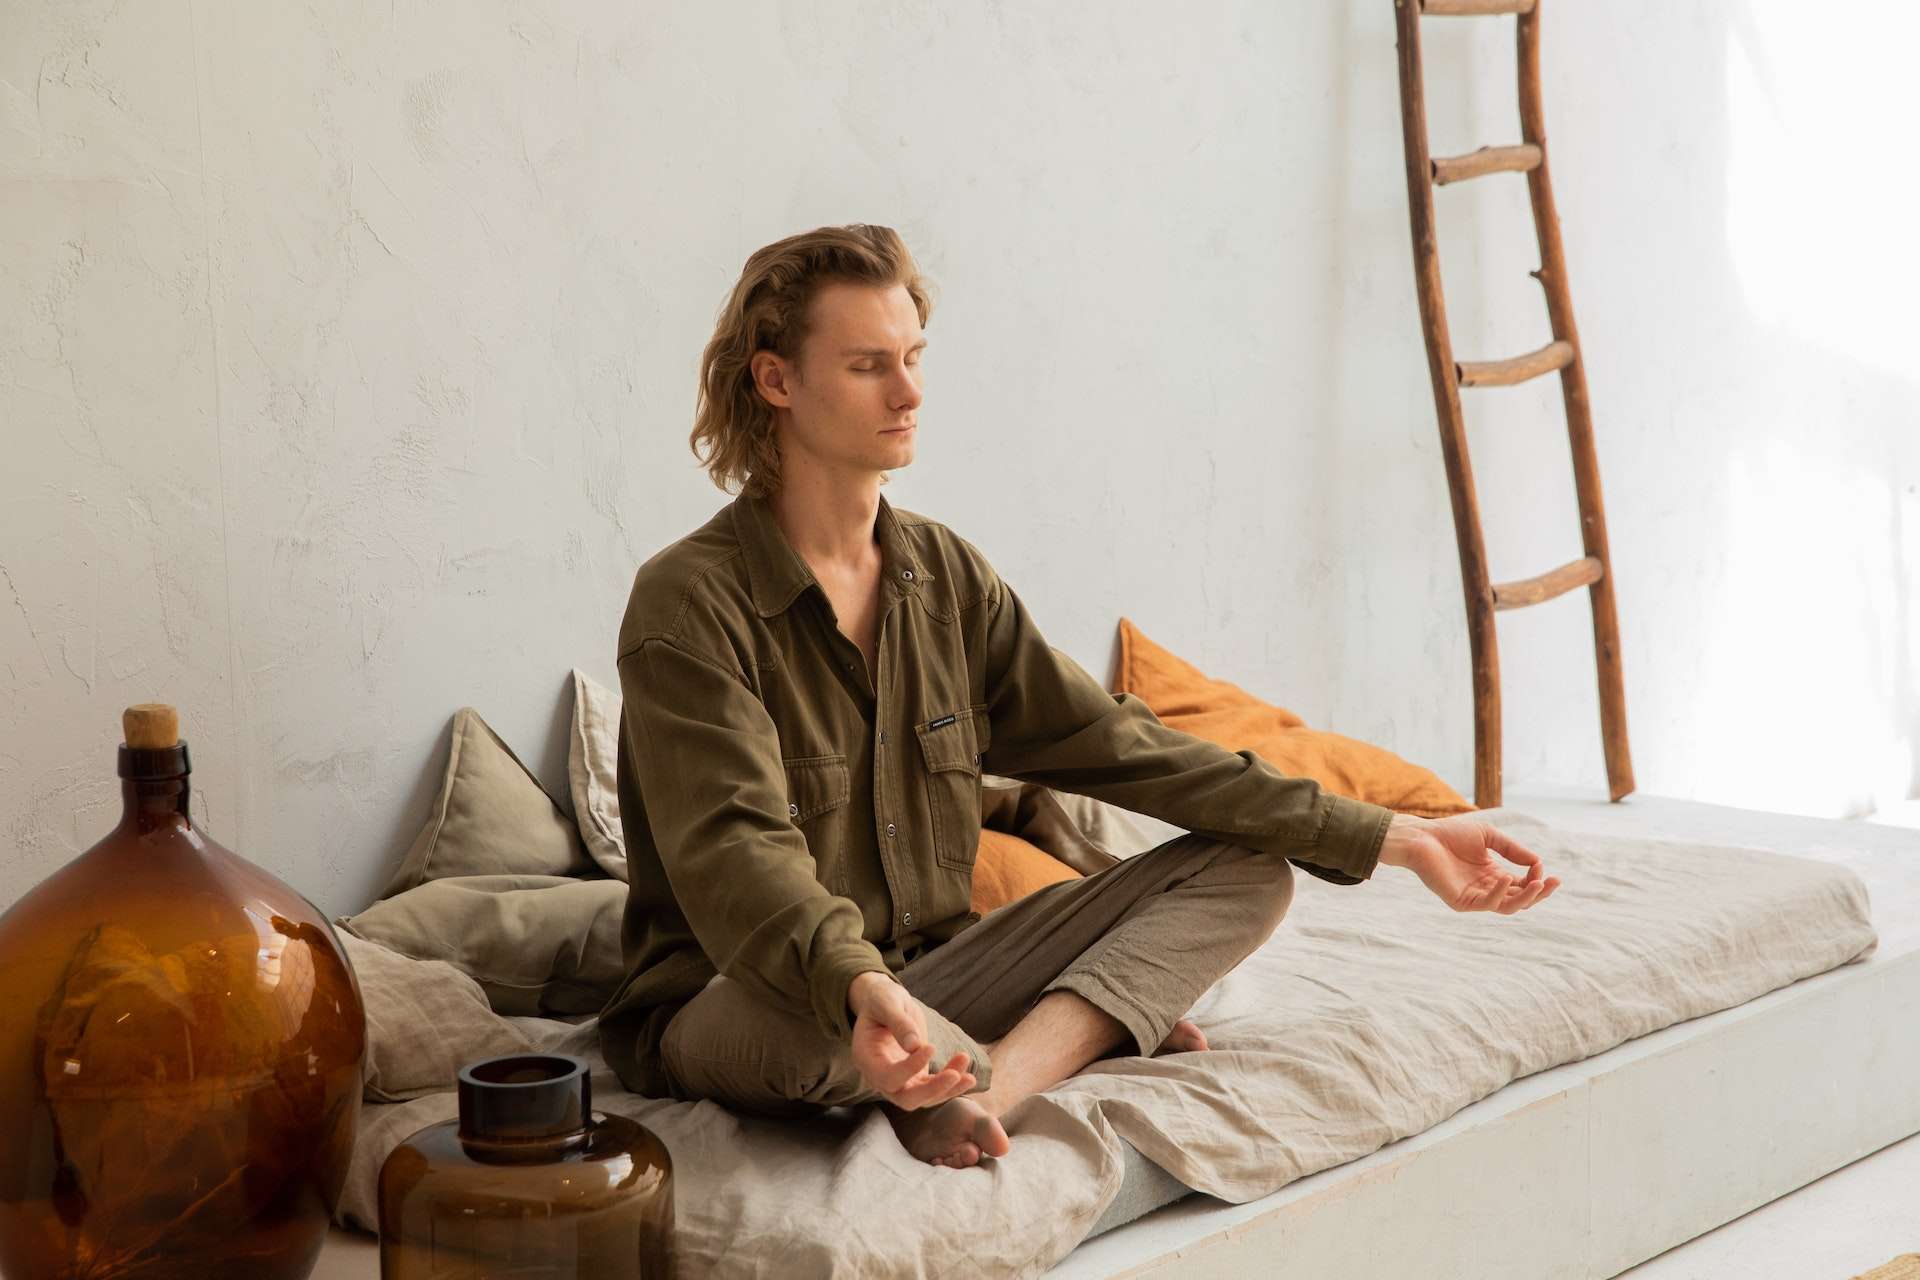 Concentrated man meditating in Lotus pose on mattress